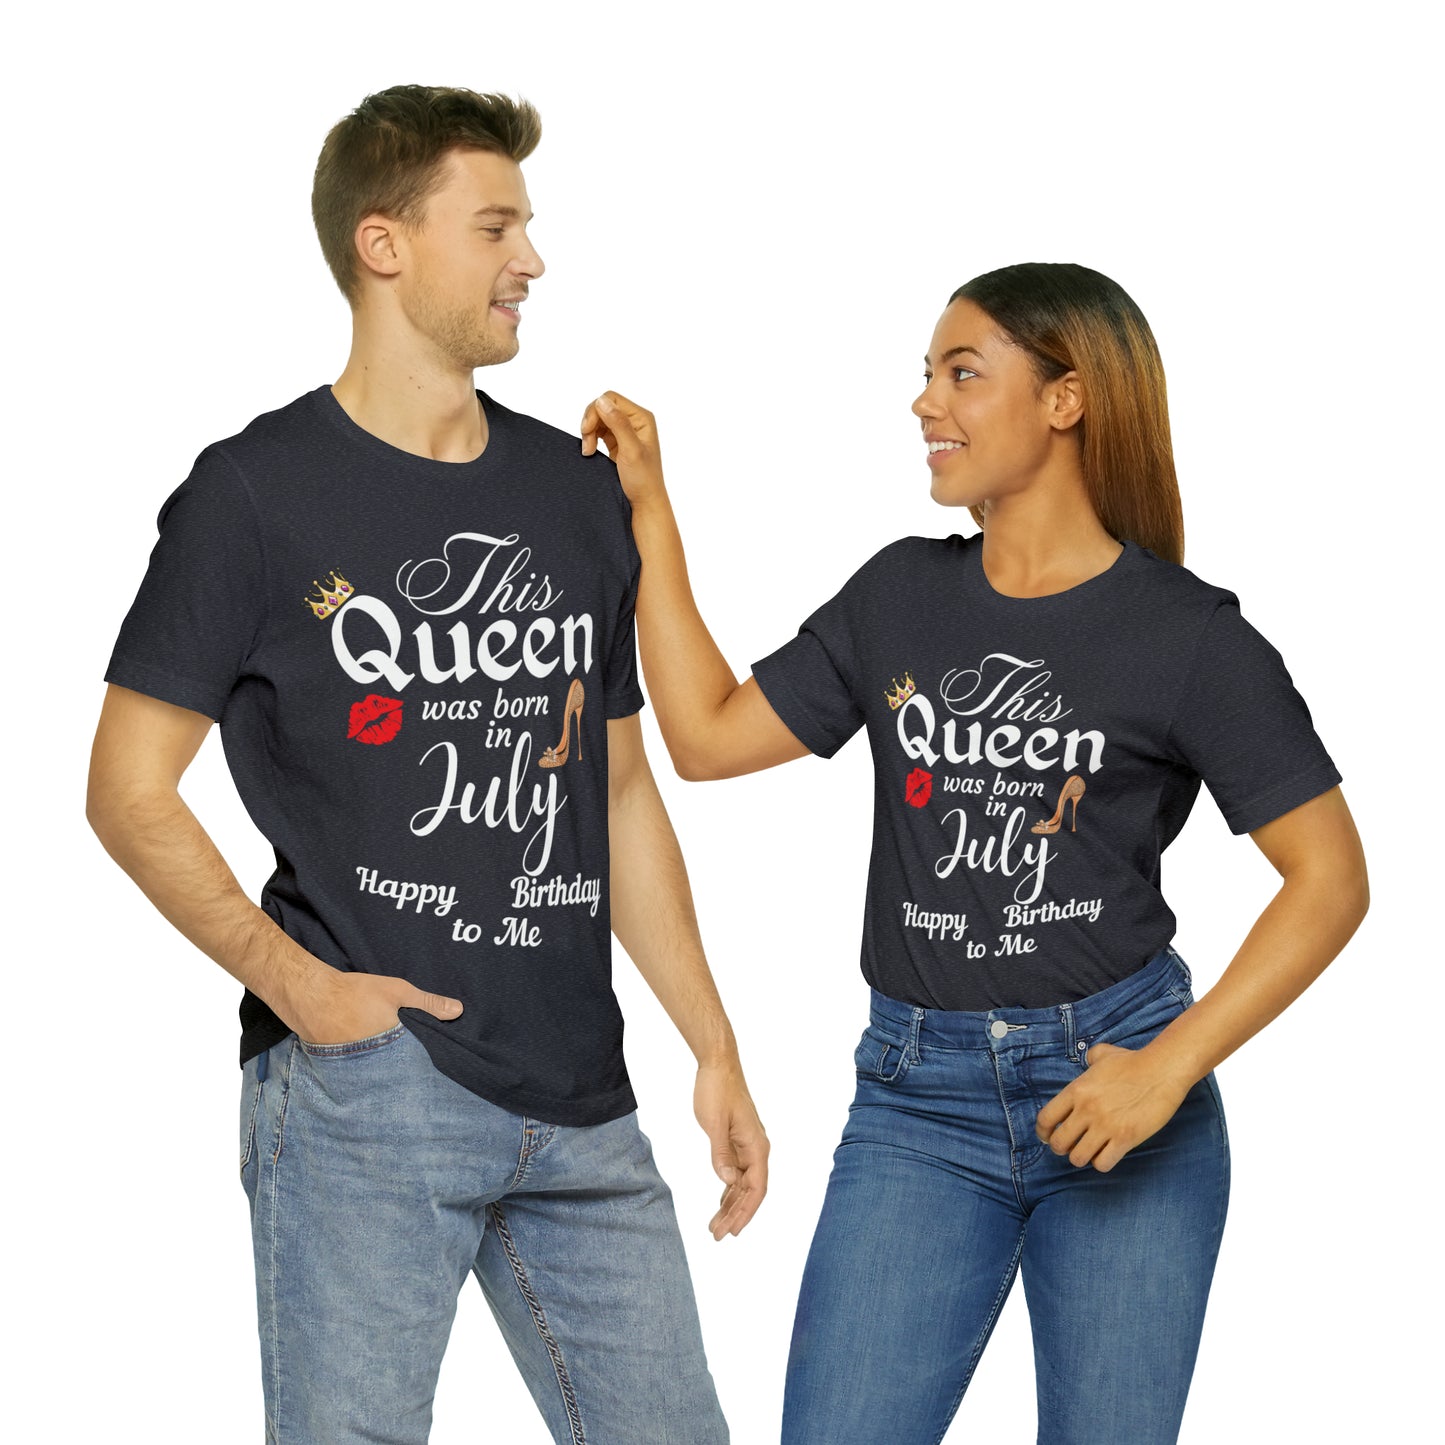 Birthday Queen Shirt, Gift for Birthday, This Queen was born in July Shirt, Funny Queen Shirt, Funny Birthday Shirt, Birthday Gift